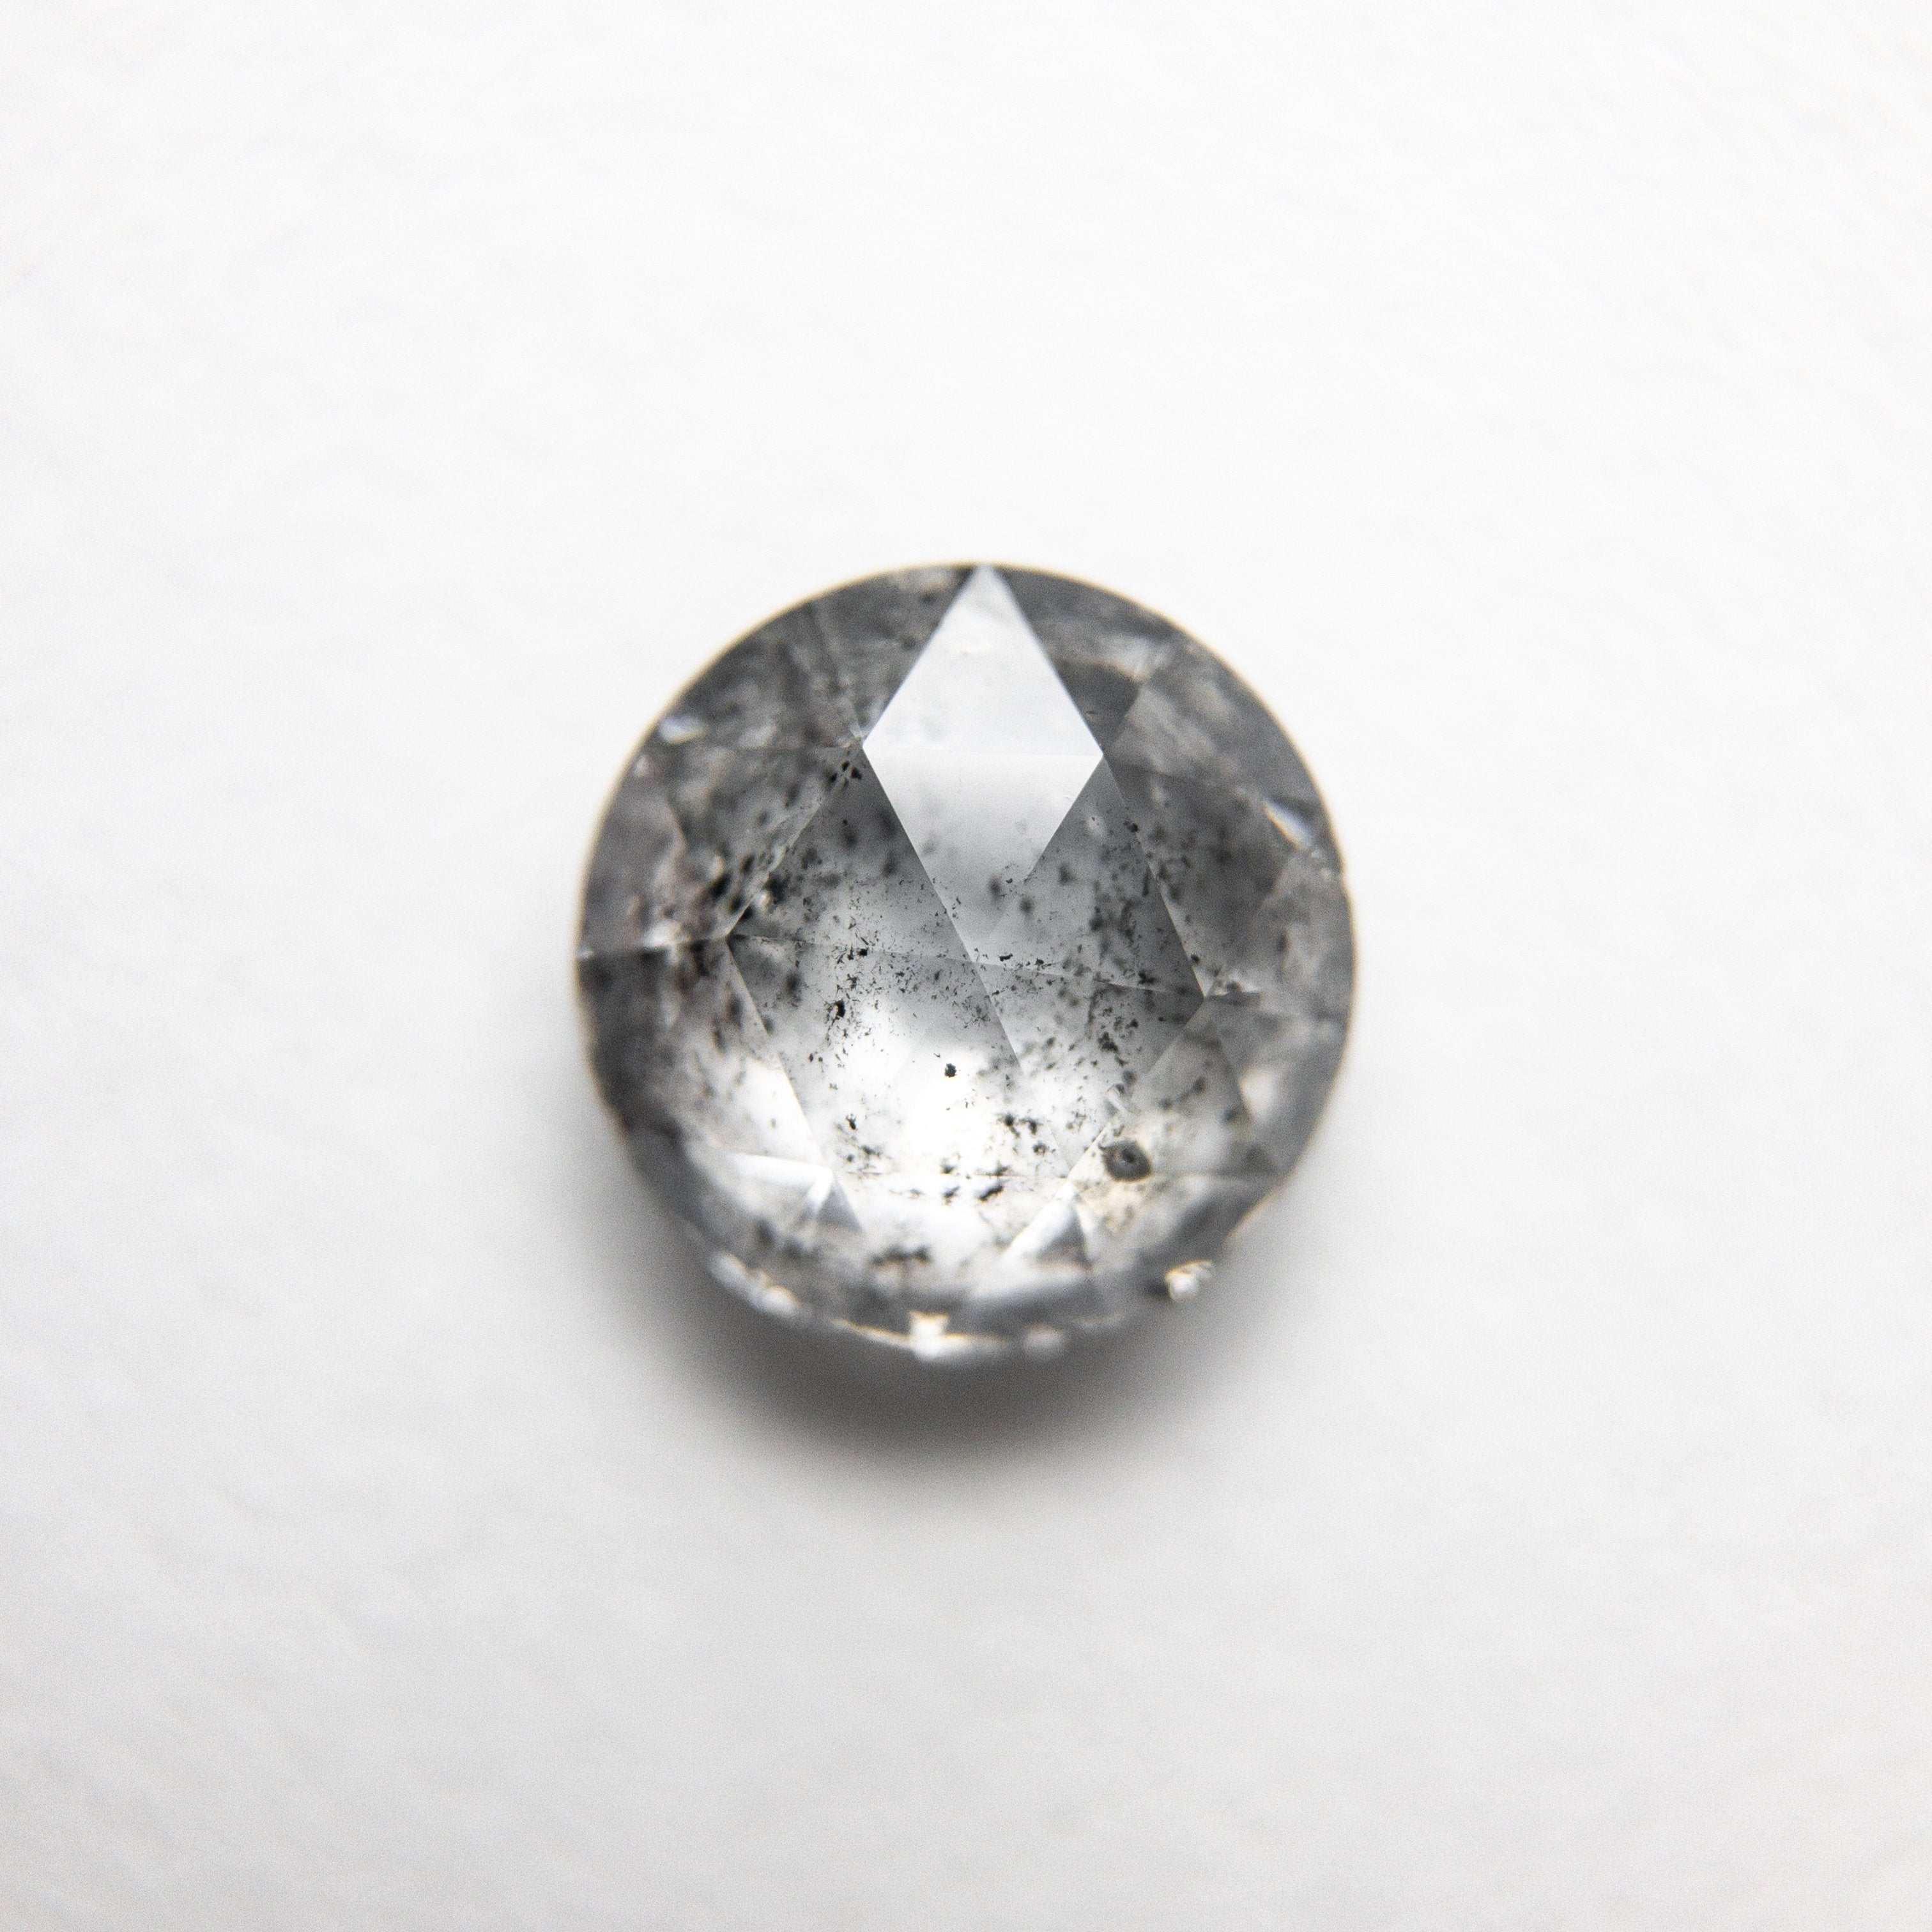 1.20ct 6.80x6.73x3.11mm Round Double Cut 18094-21 HOLD D1077 8/31/20